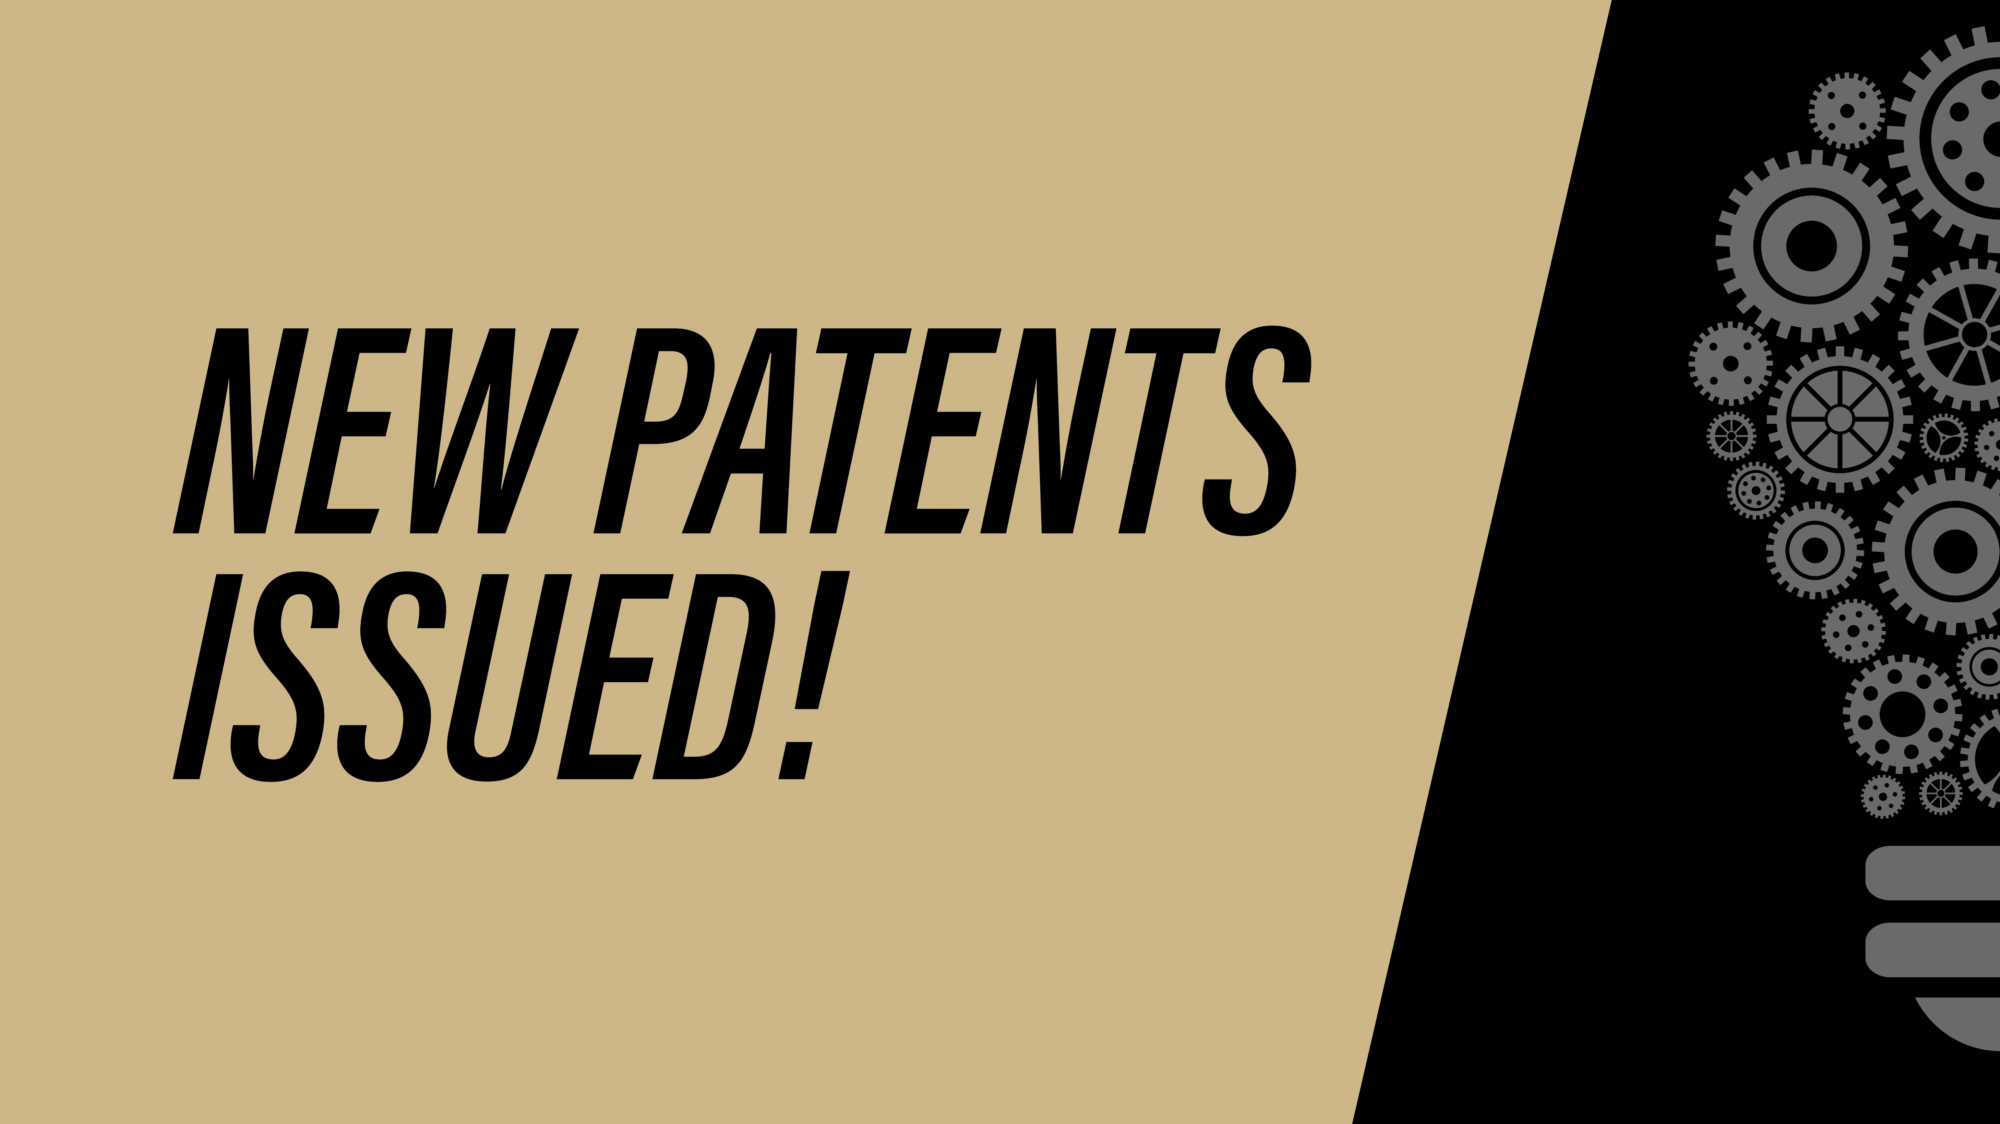 18 U.S. patents recently issued to Purdue University innovations